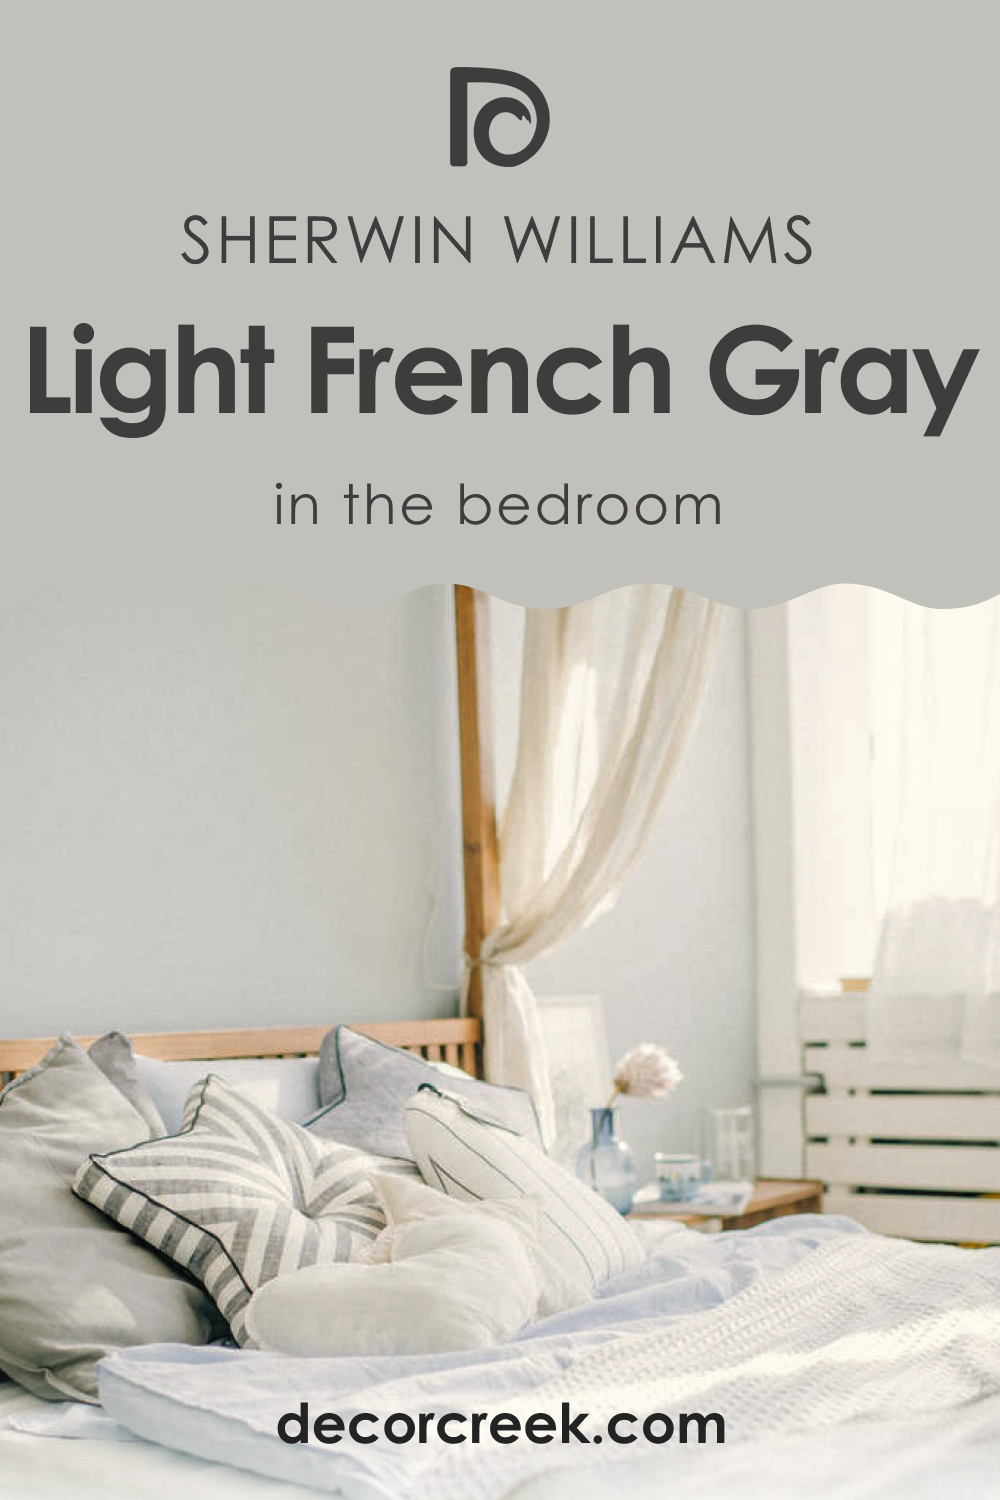 How to Use SW 0055 Light French Gray in the Bedroom?